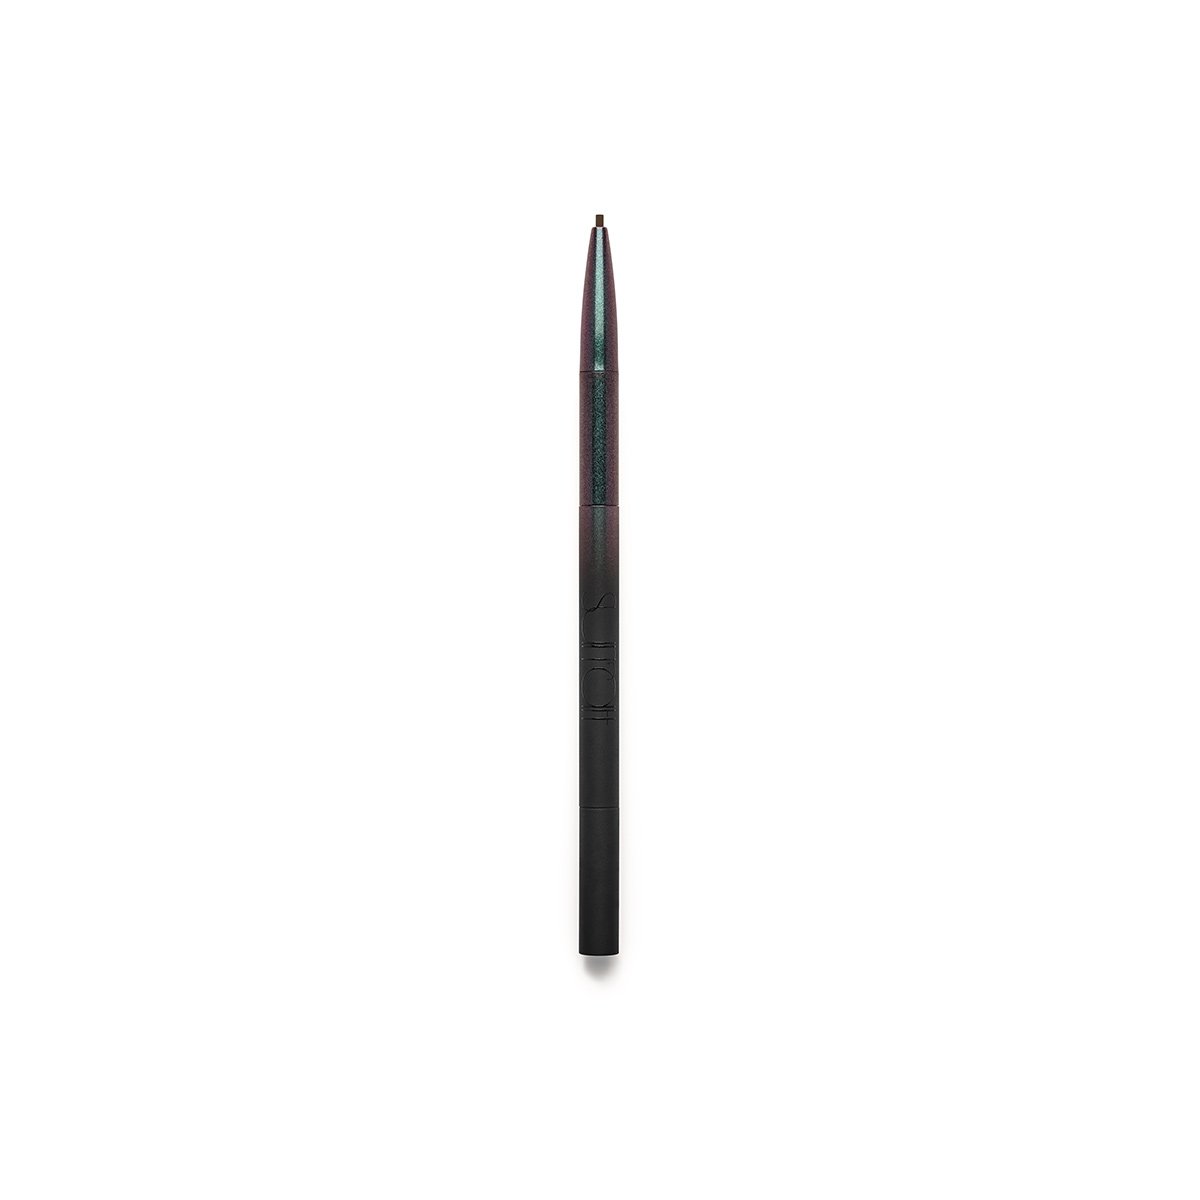 BRUNETTE - BROWN - precise eyebrow pencil with spoolie in brunette brown shade 